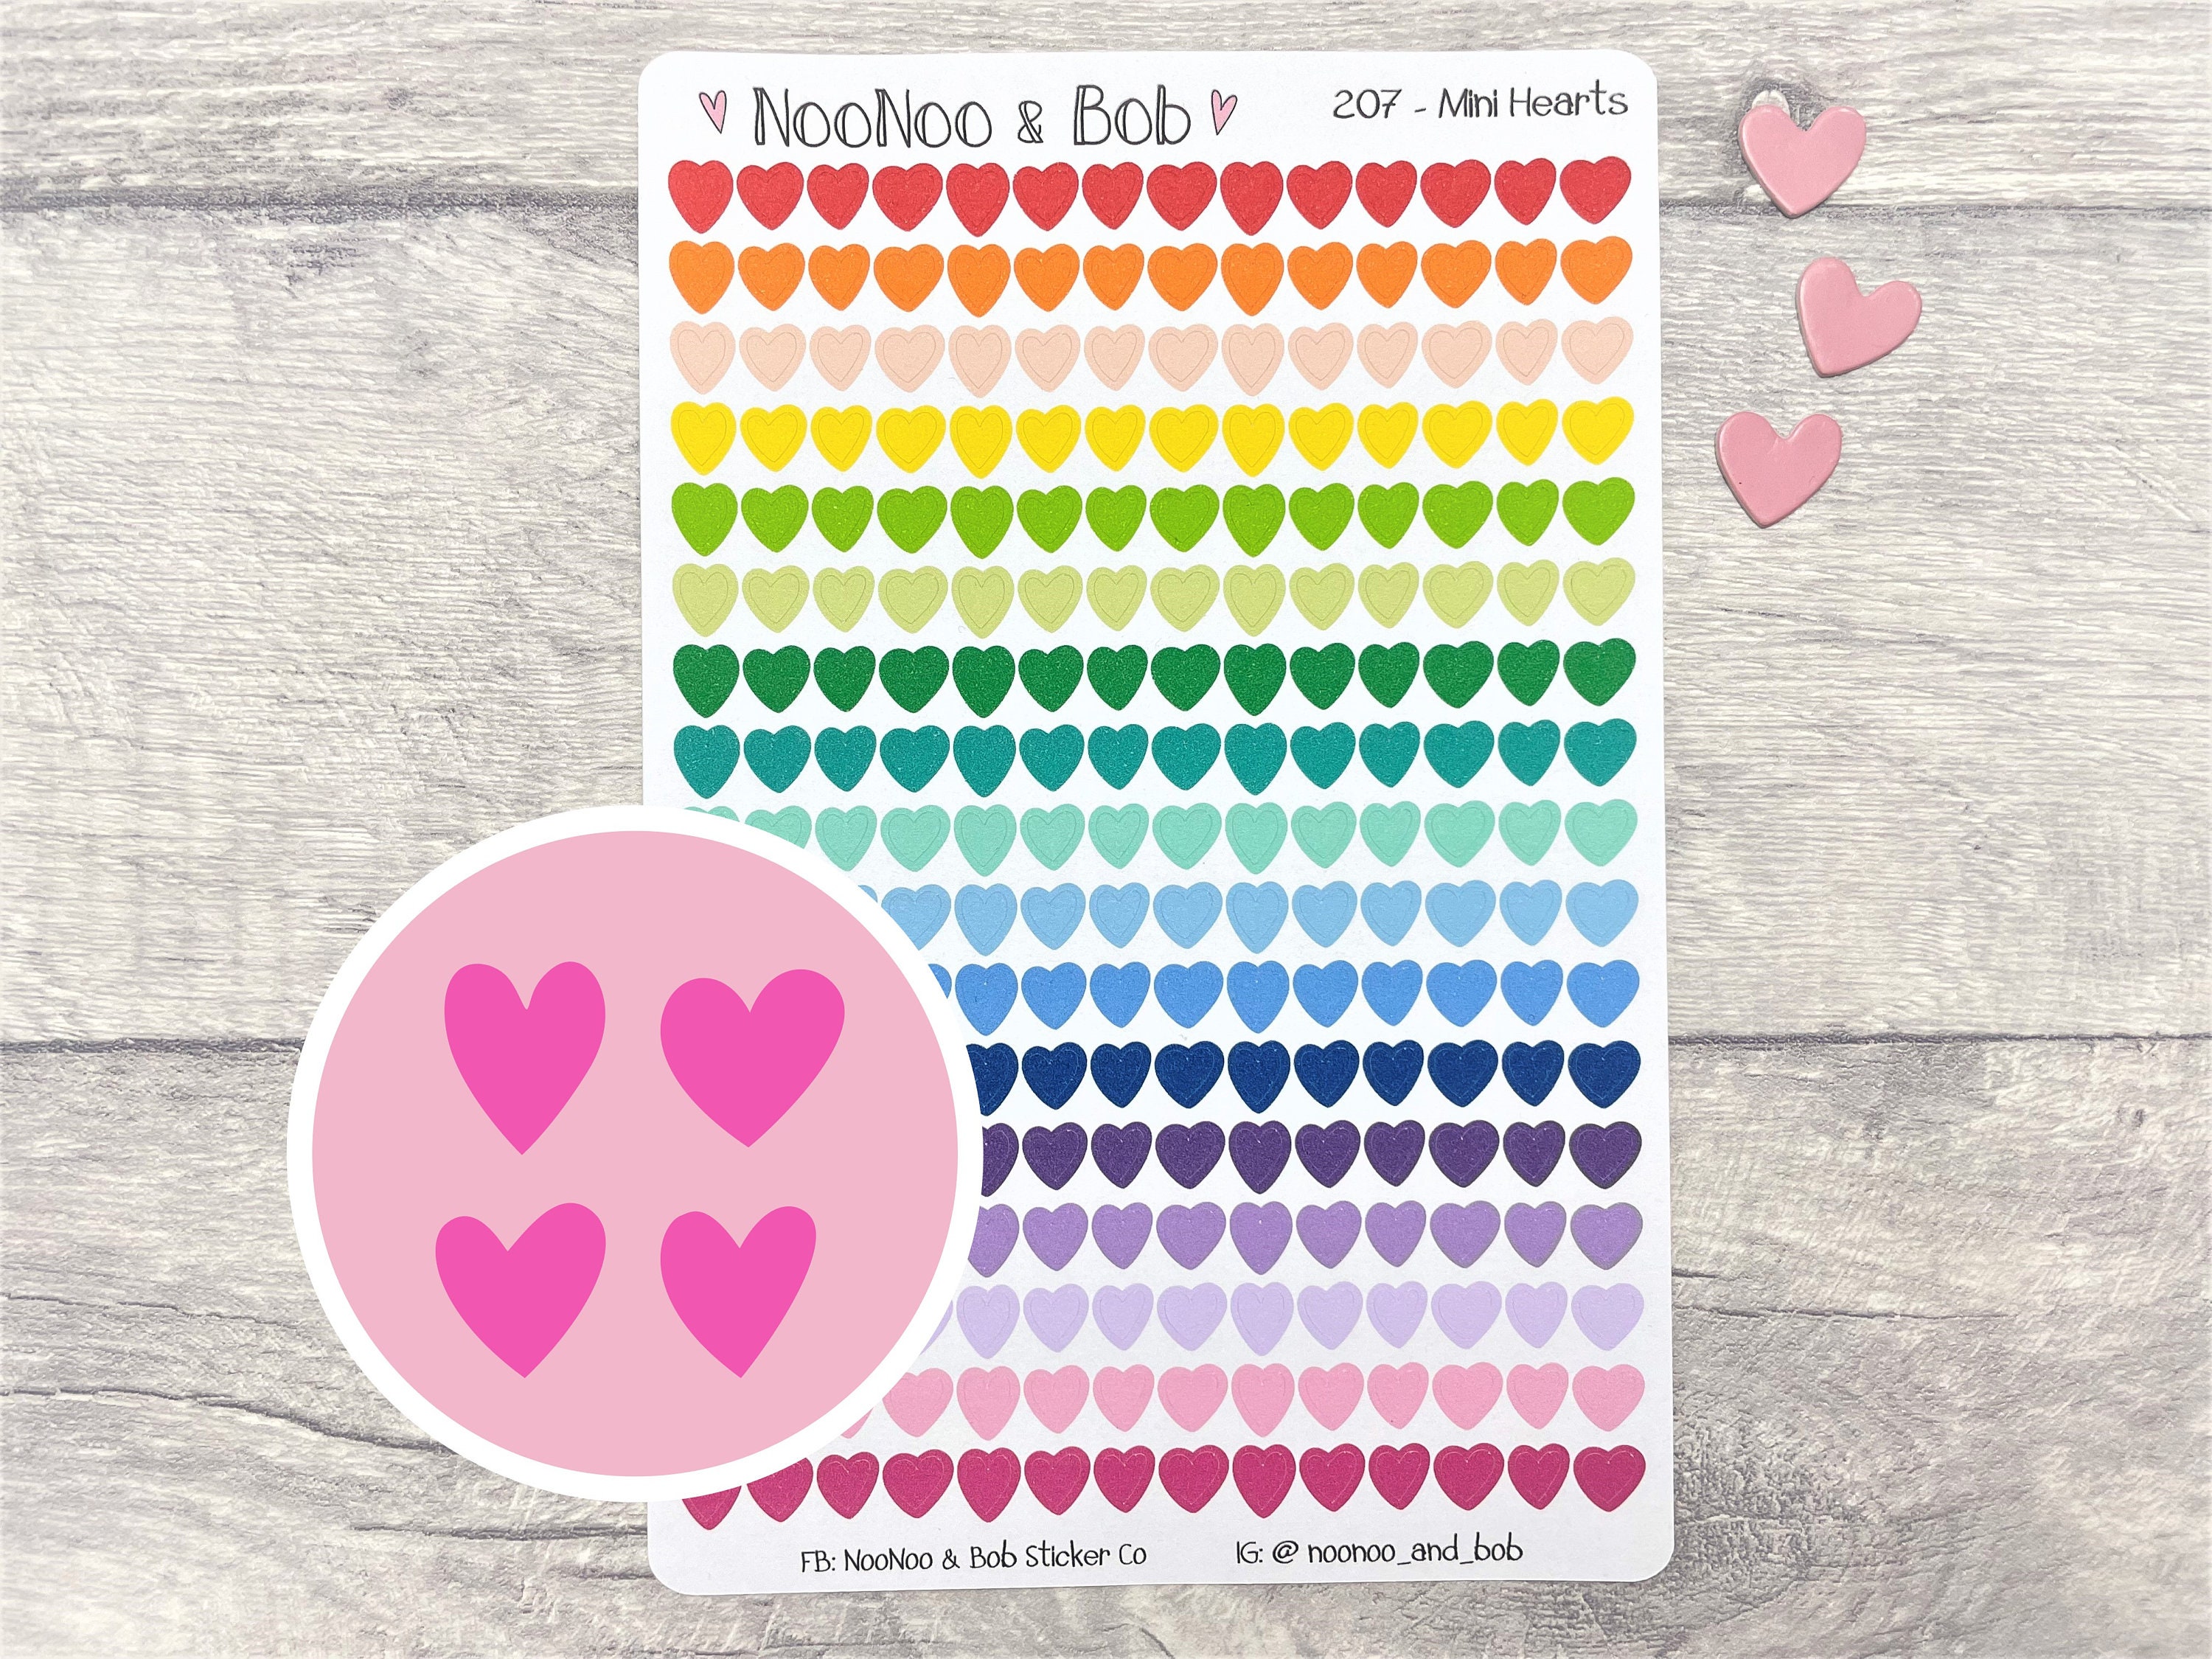 48 Assorted Neon Mini Heart Stickers 3/4 Inch Bright Pink 